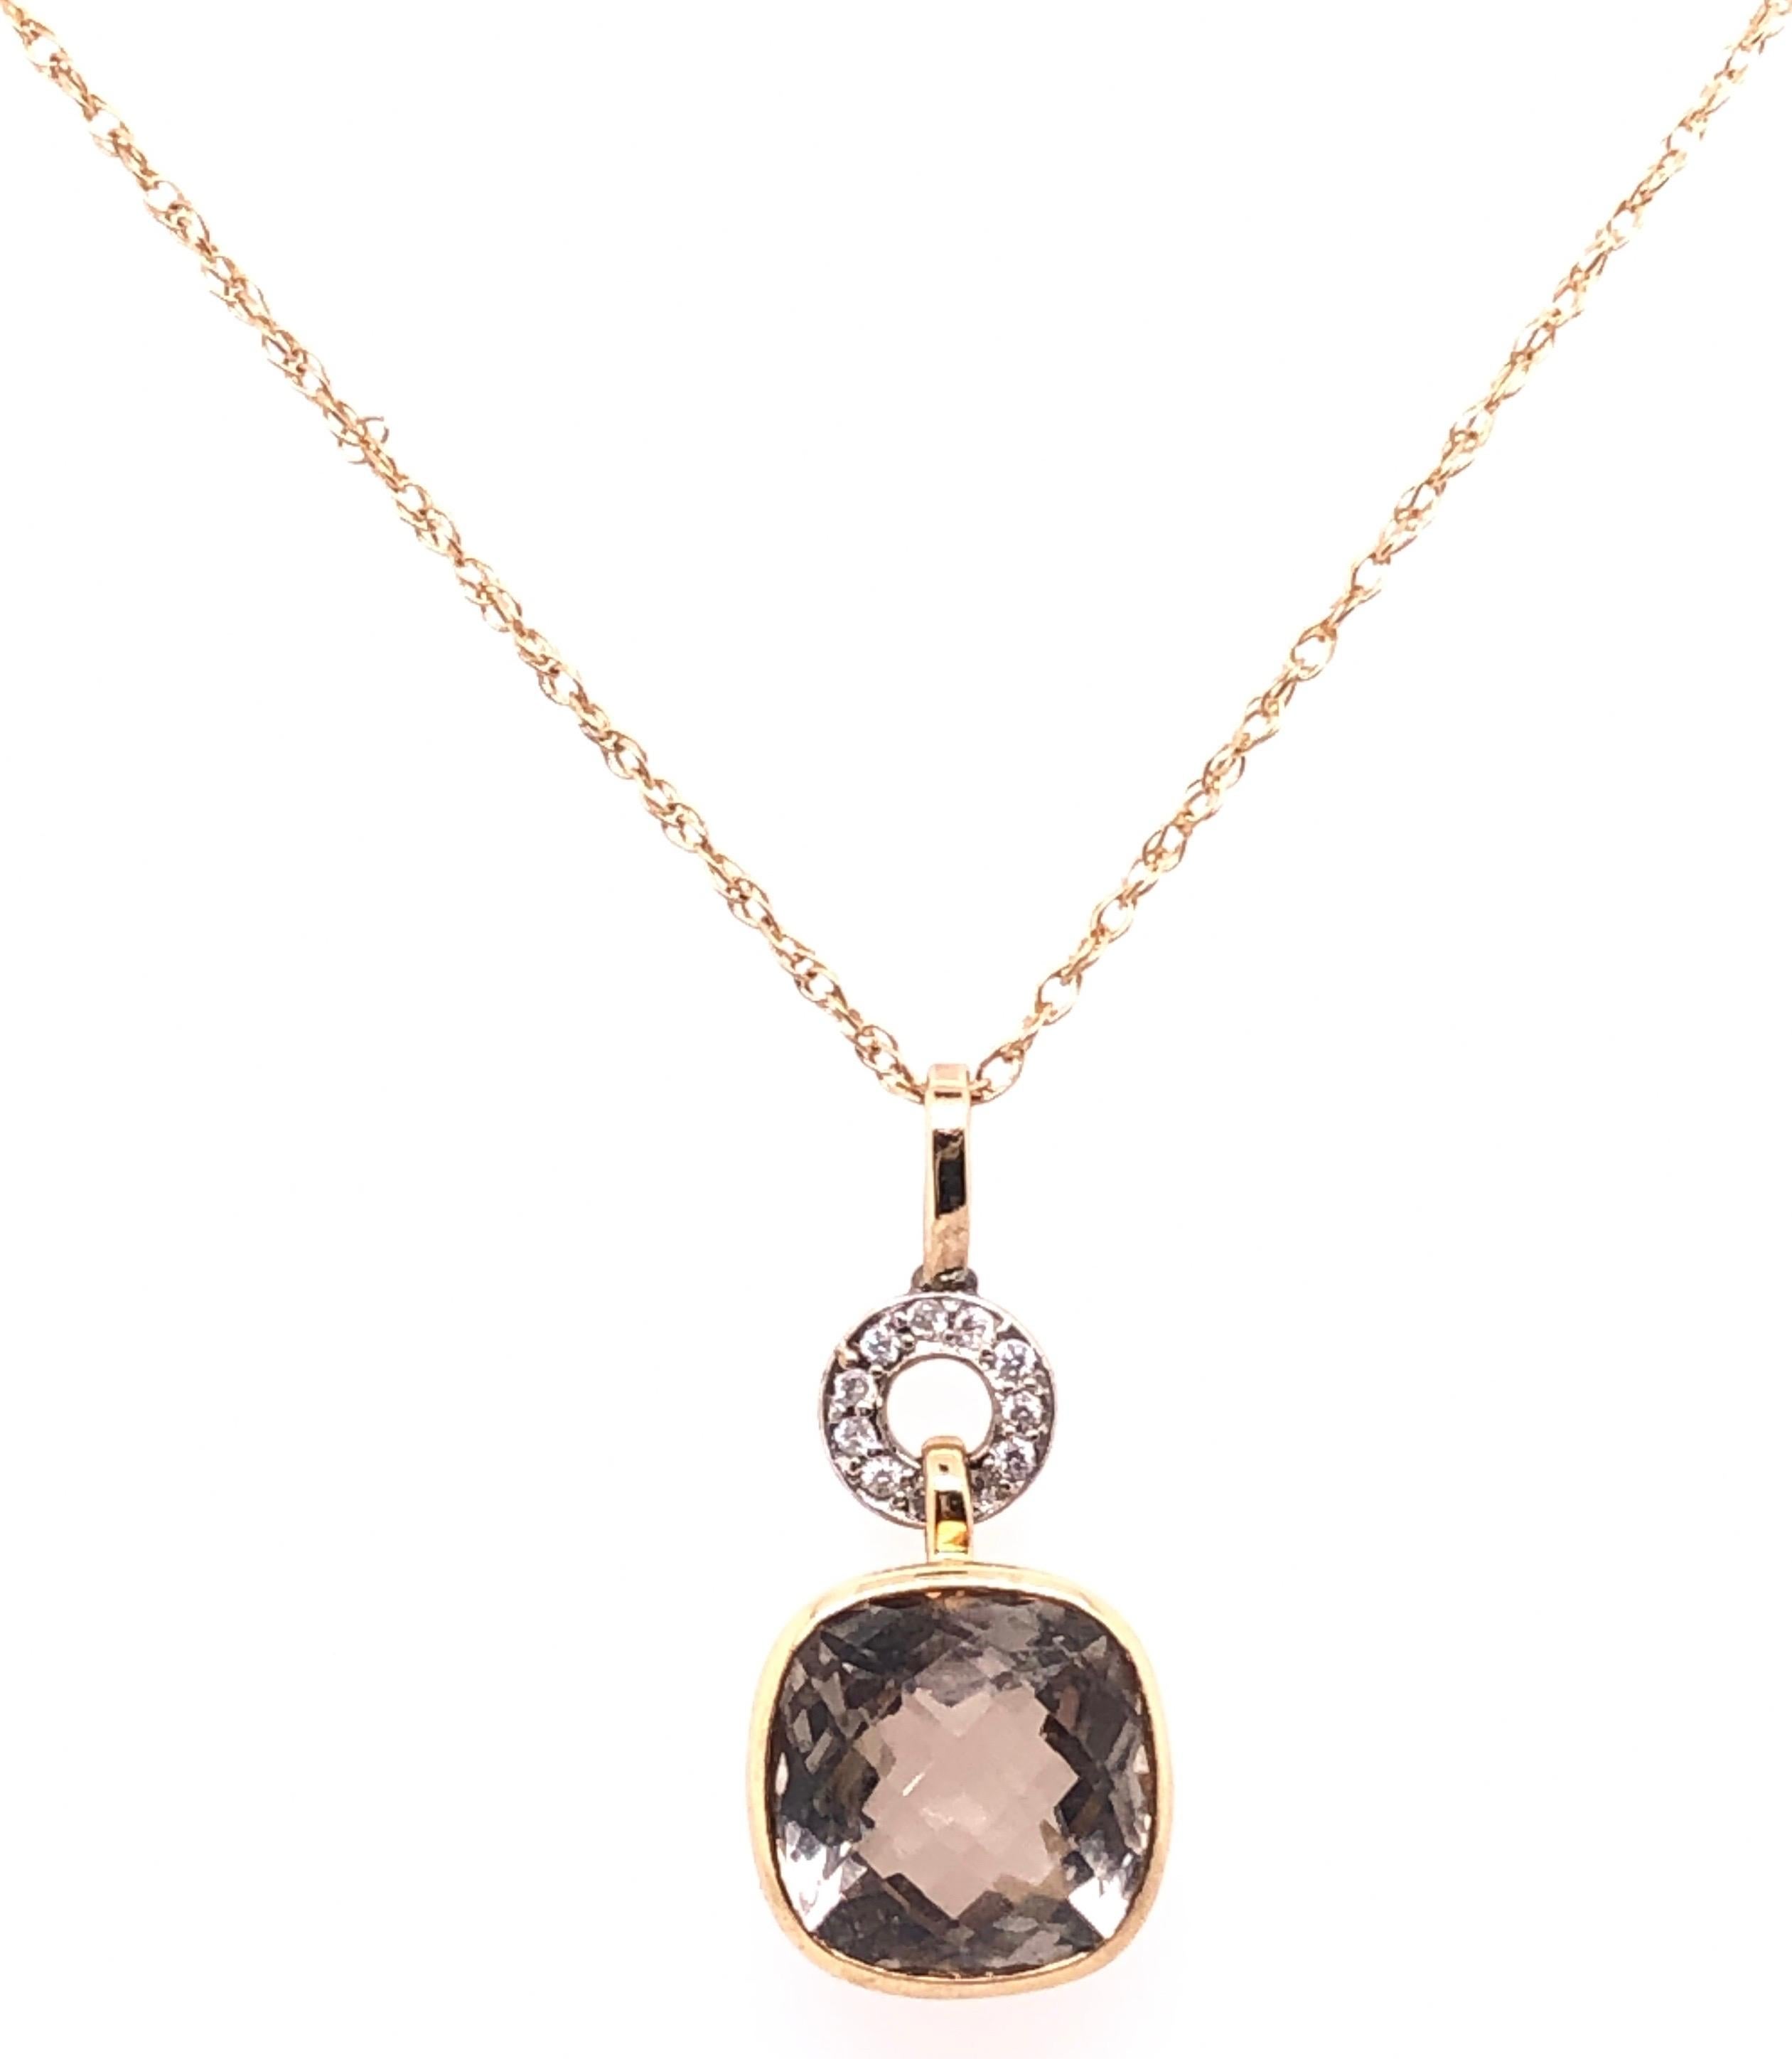 Women's or Men's 14 Karat Gold Necklace with Round Sapphire and Diamond Pendant For Sale